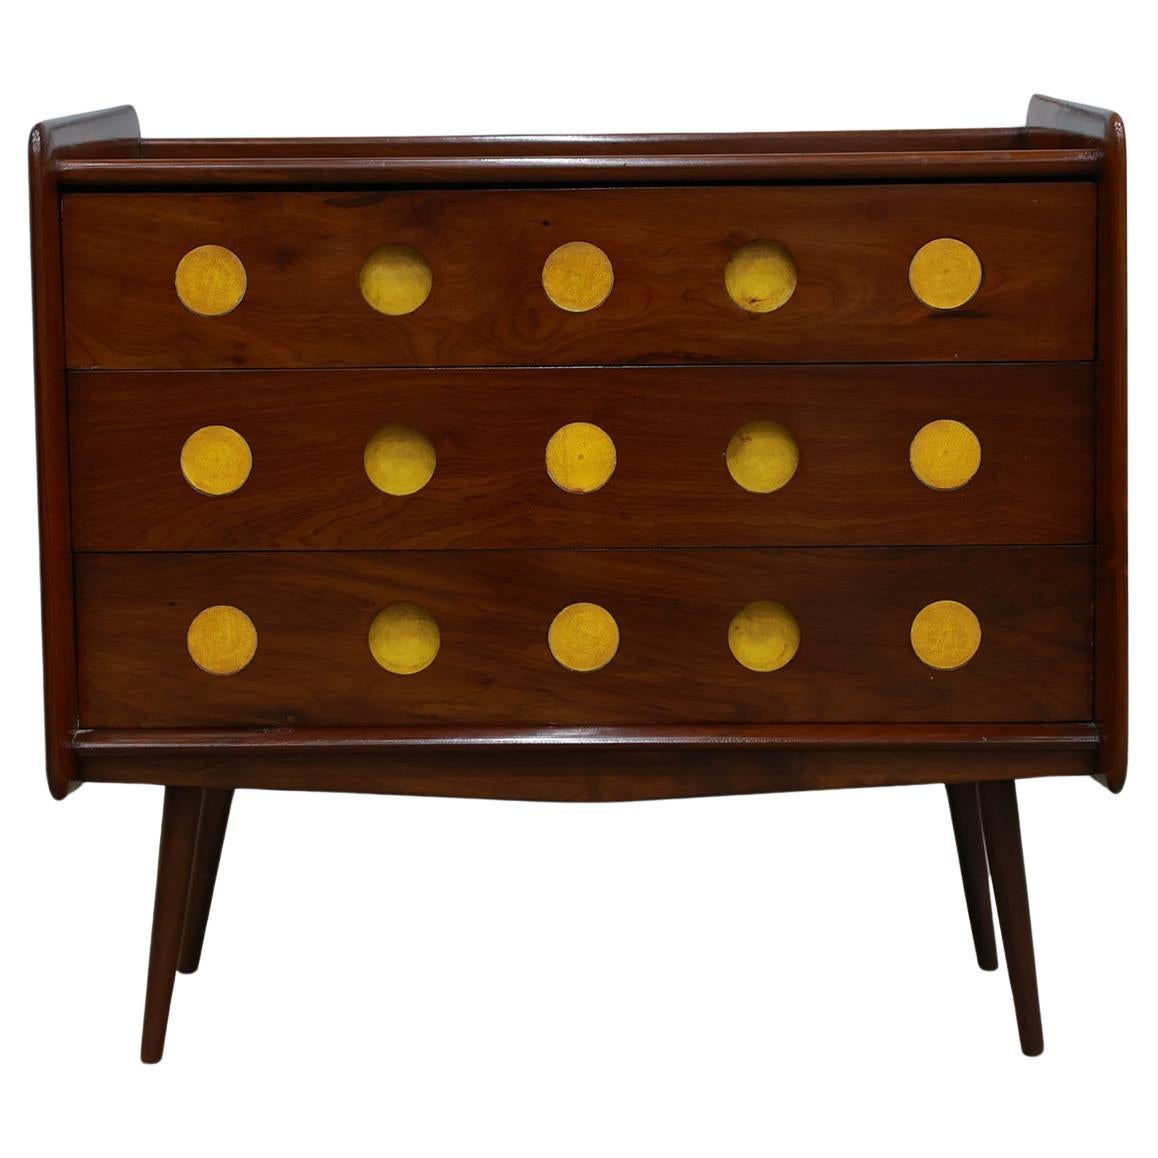 Brazilian Modern Chest of Drawers in Hardwood by Moveis Cimo, 1950s, Brazil For Sale